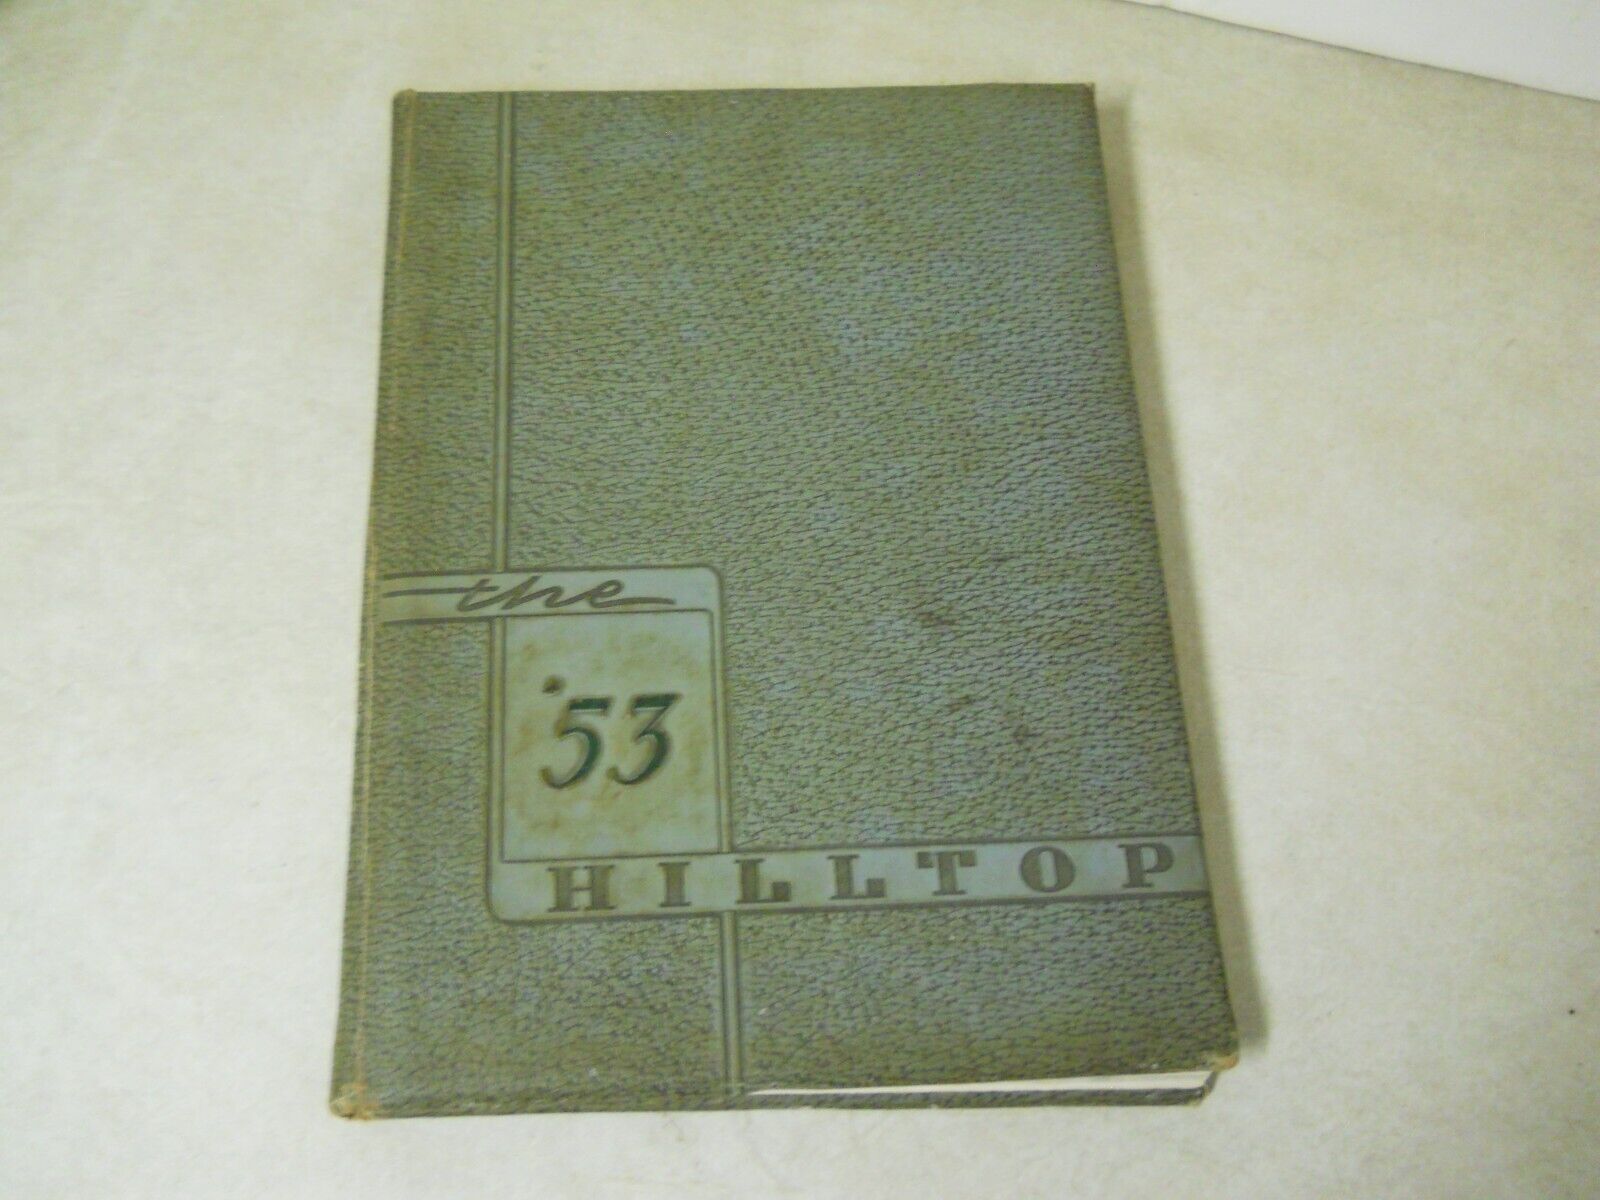 1953 Hilltop Hapeville High School Hapeville Georgia Yearbook Annual